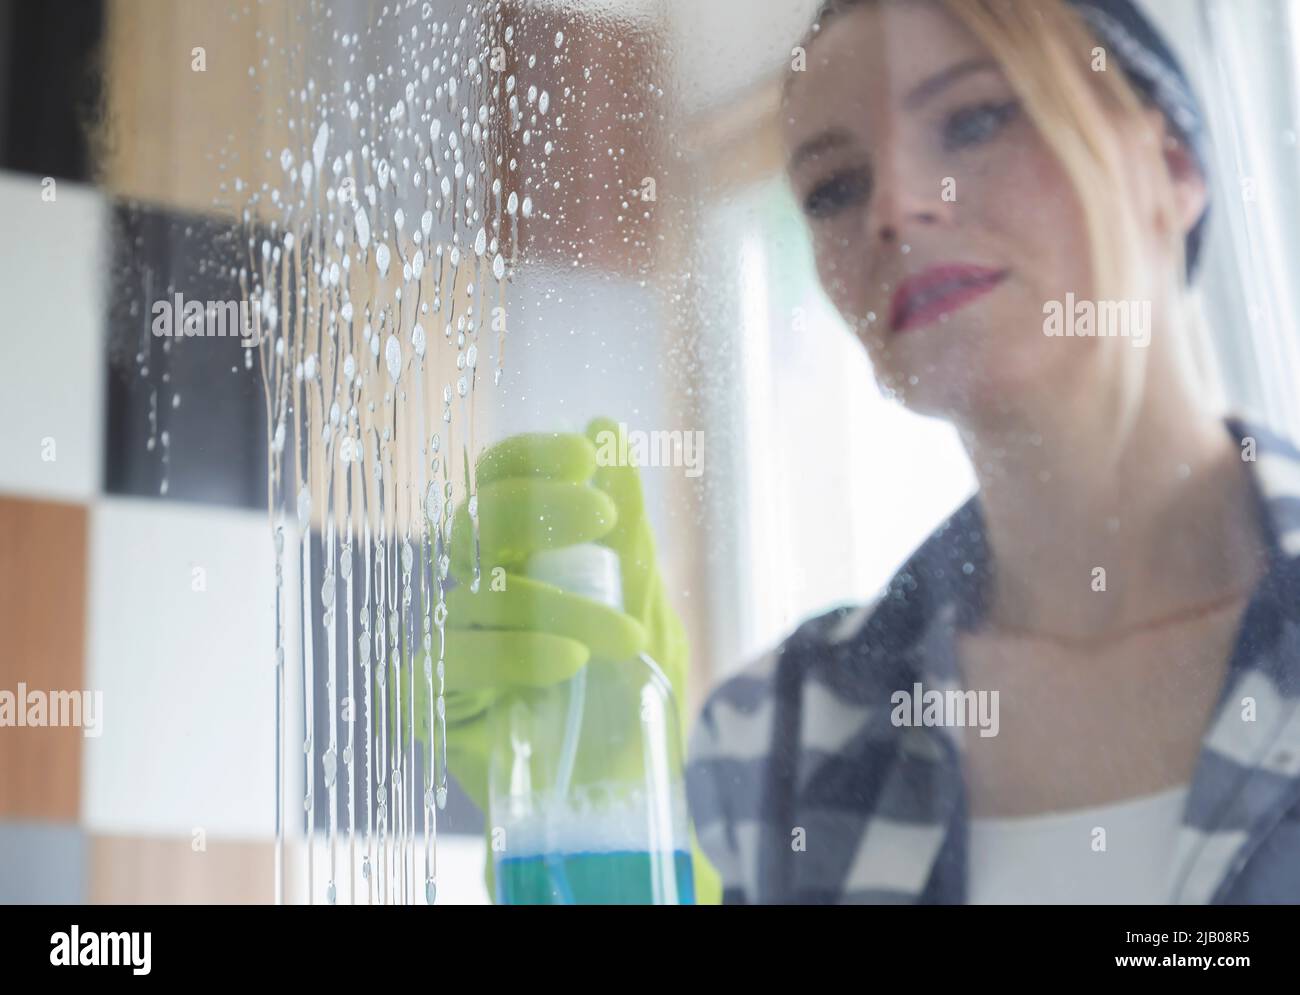 Cleaning the glass from dirt. Woman in green gloves washes the window with a blue cloth. Stock Photo